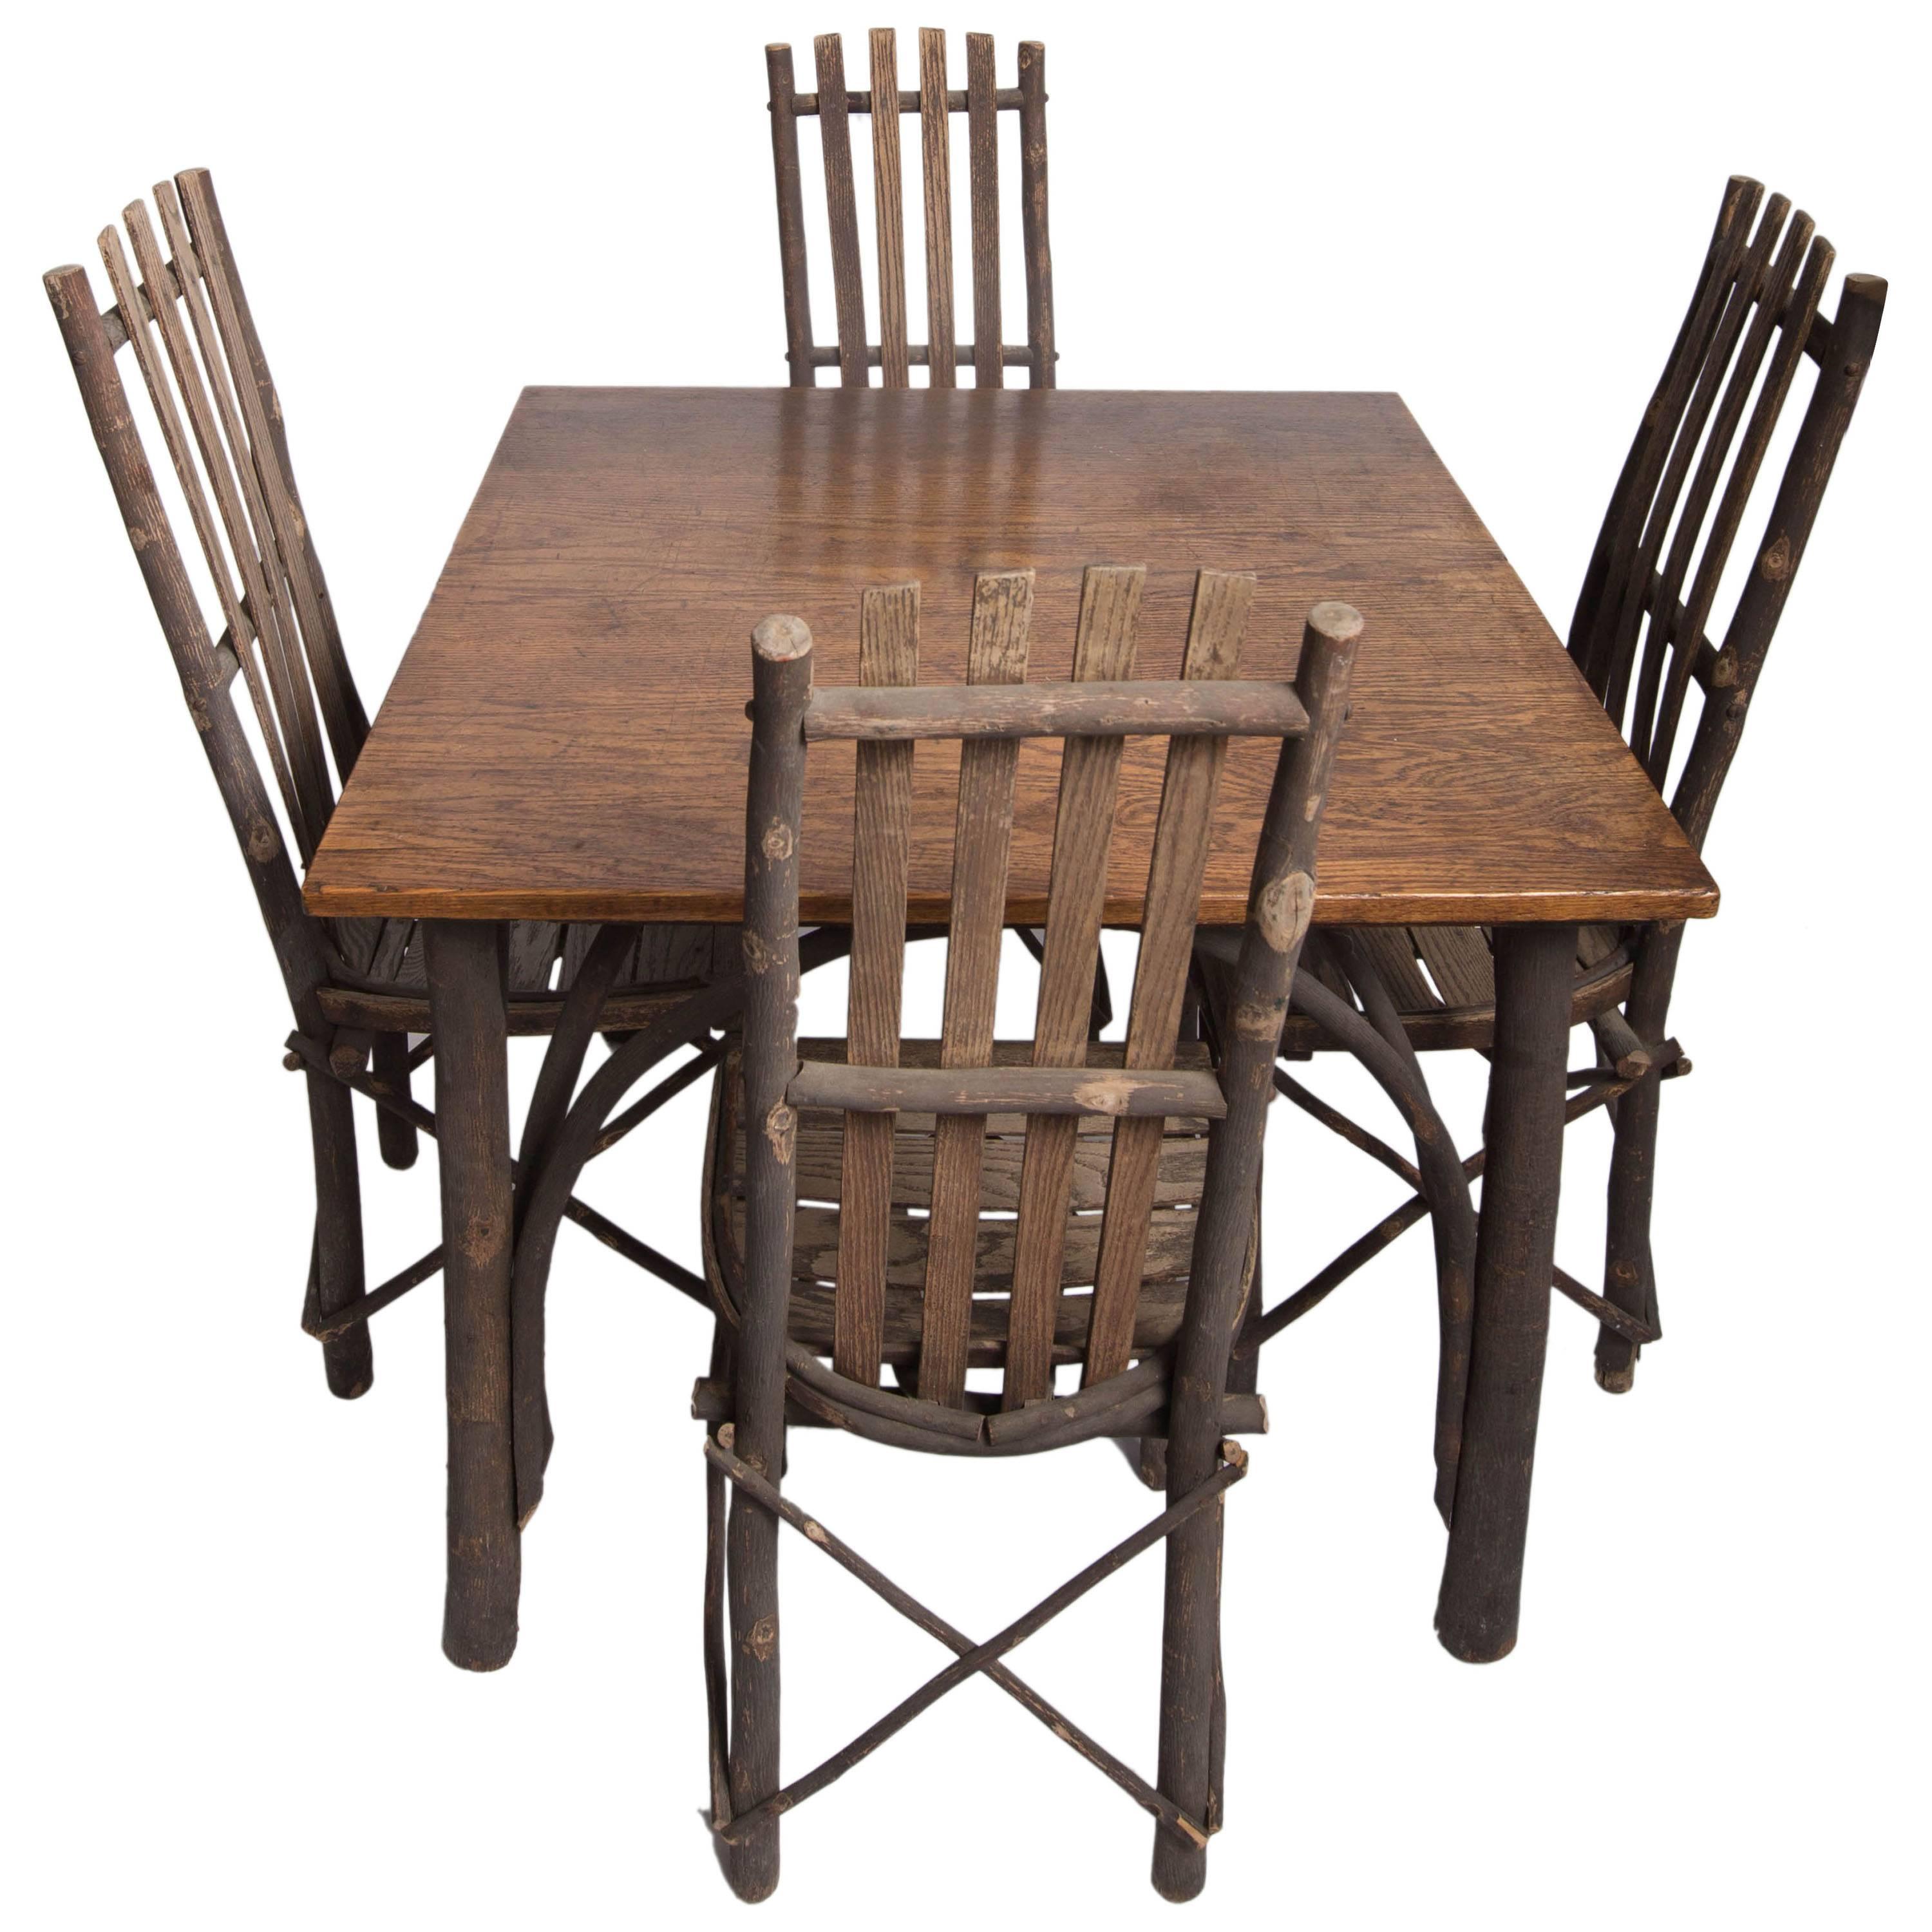 Antique Adirondack Old Hickory Table and Chairs For Sale